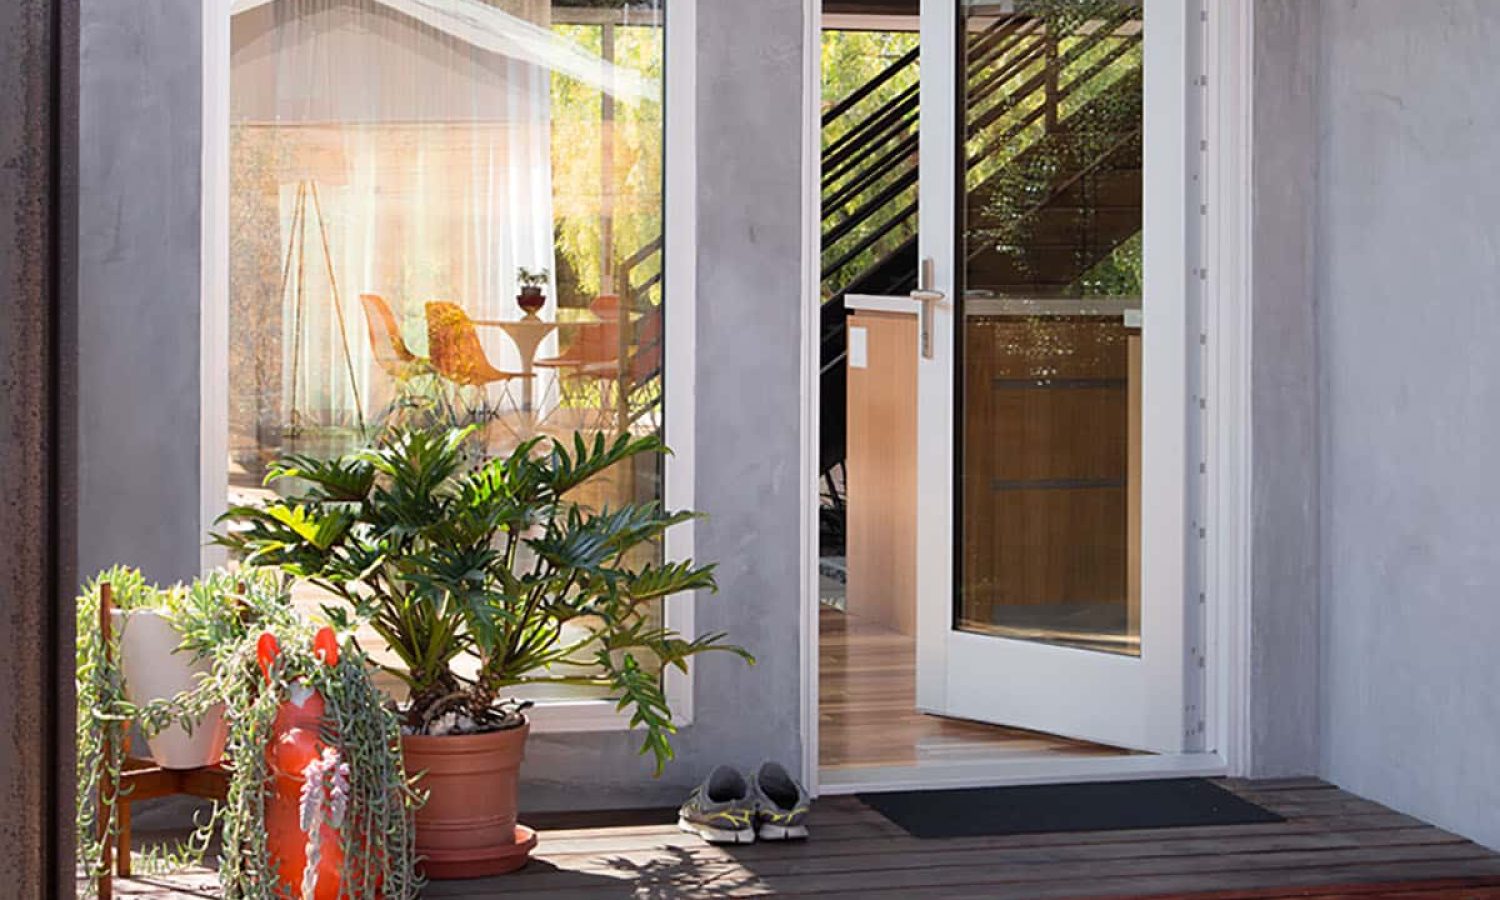 An open hinged door lends a modern aesthetic to the craftsman home next to a tall, fixed window.